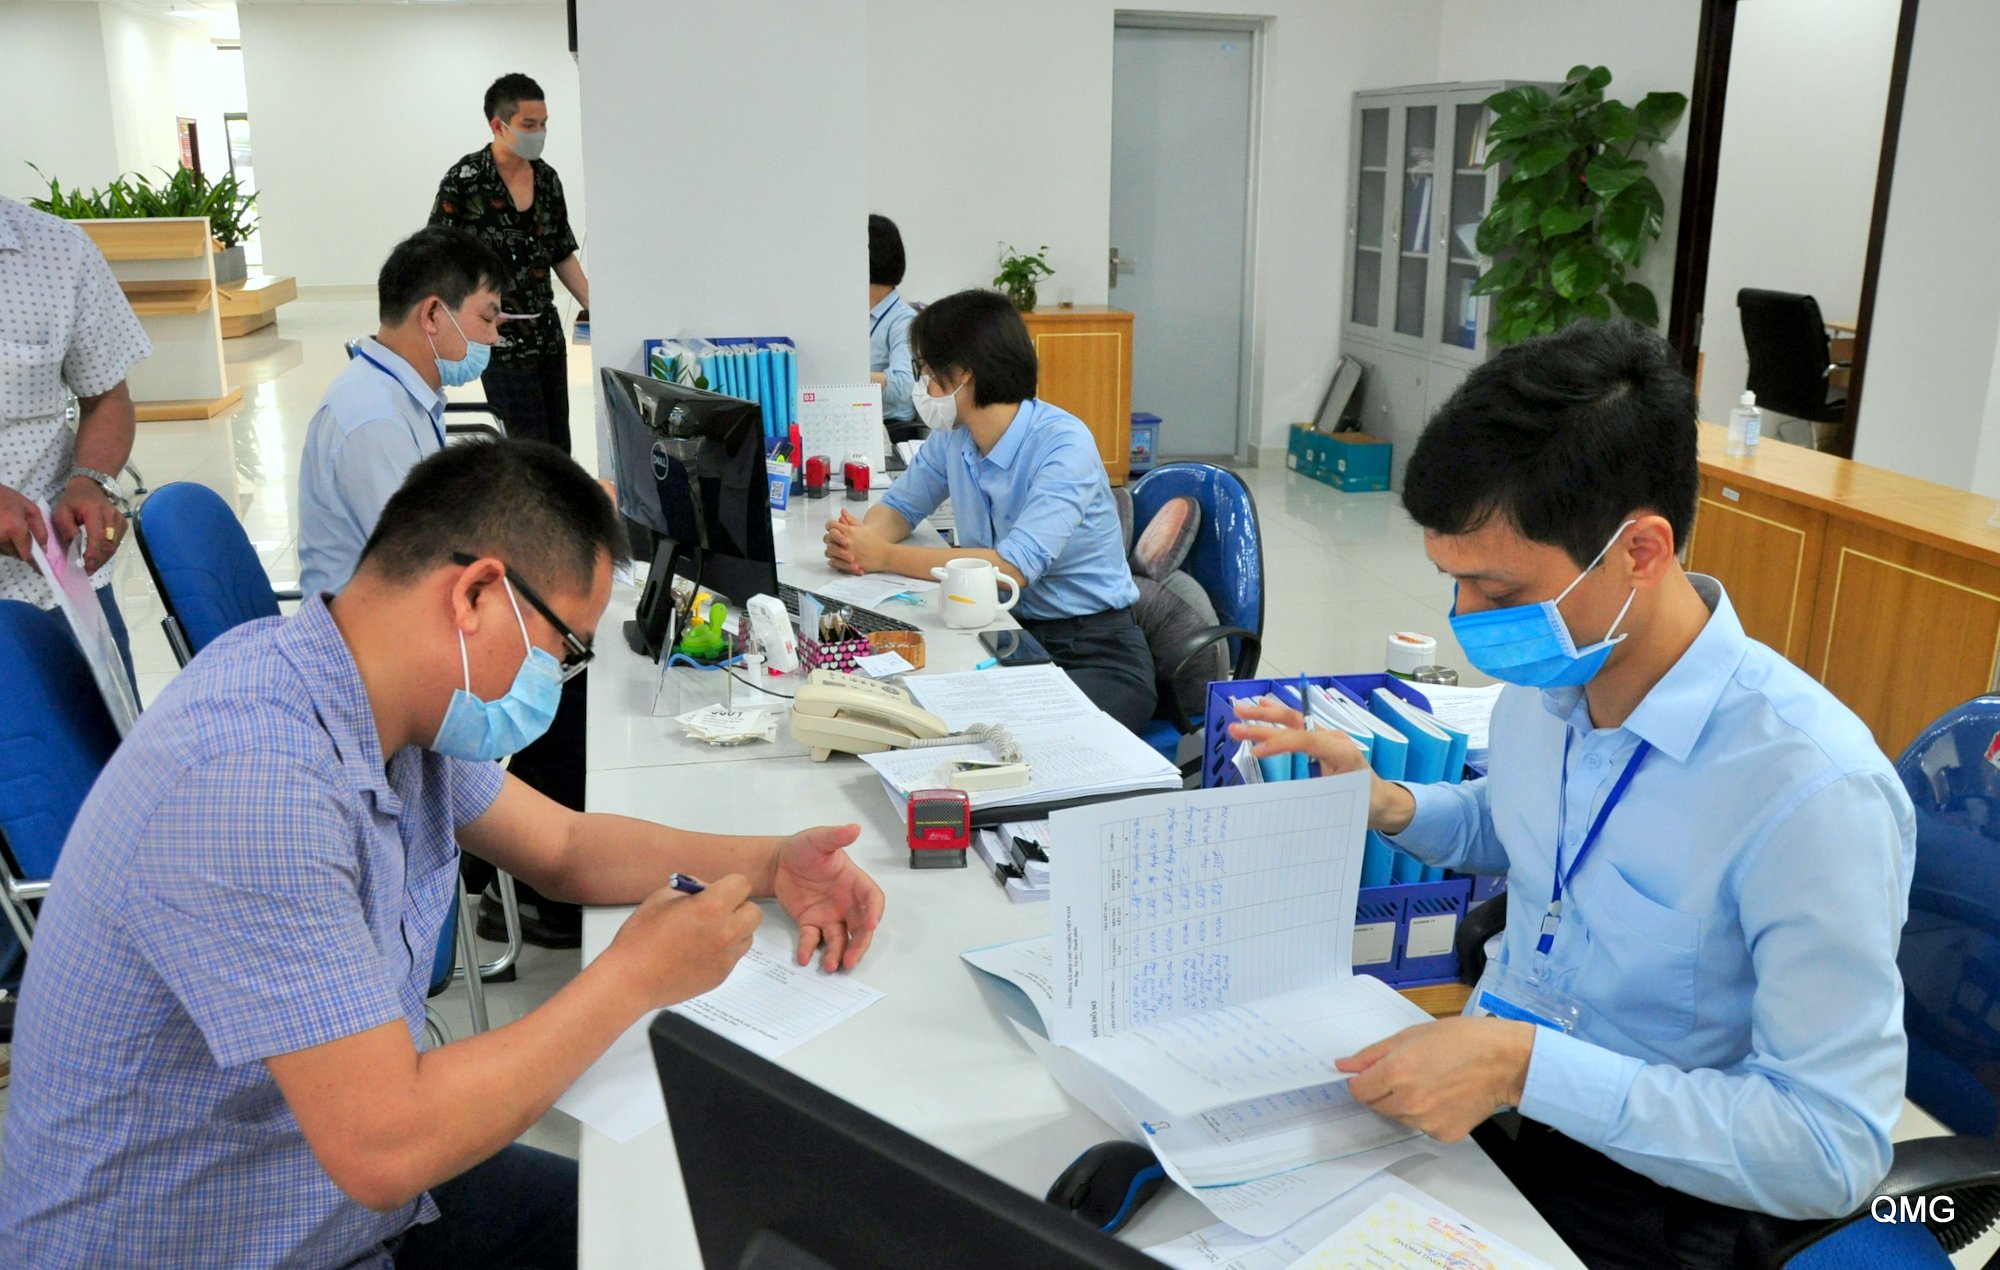 Staffs at Quang Ninh Public Service Administration Center and locals dealing withadministrative procedures at the center wore face masks